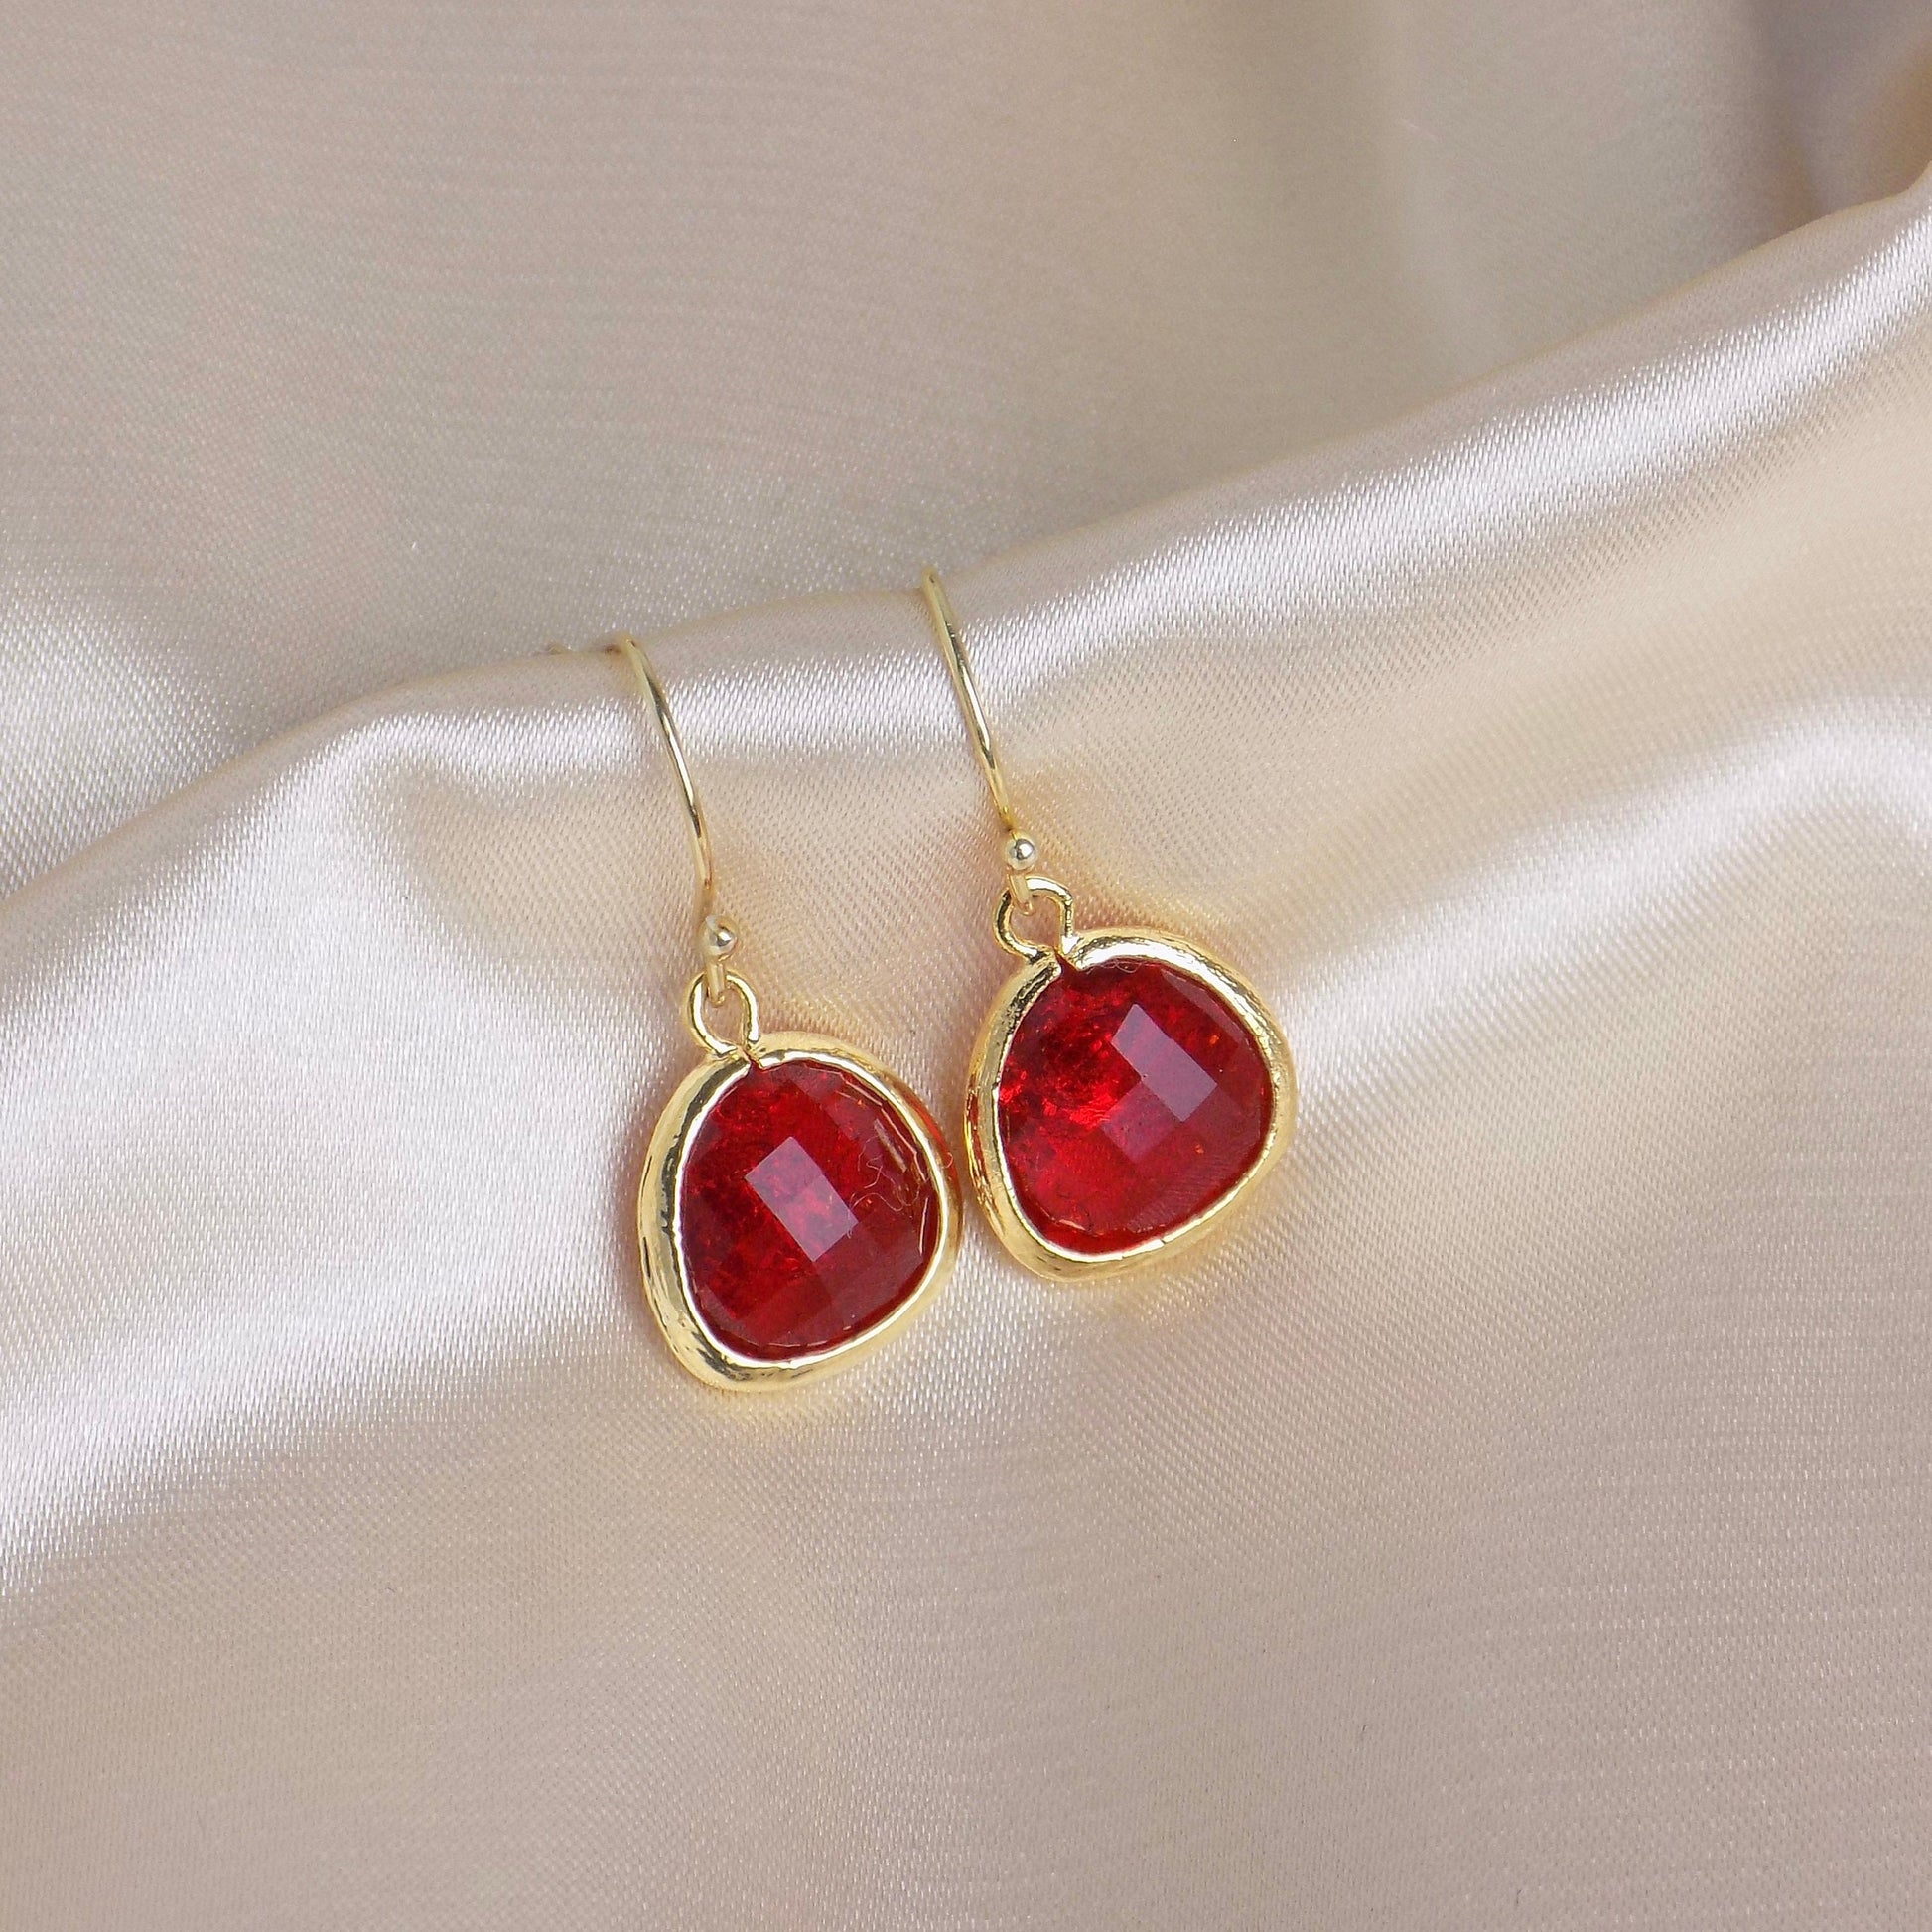 Valentines Day Gift, Red Crystal Drop Earrings Gold, Gift For Girlfriend, Gift For Wife, M6-615